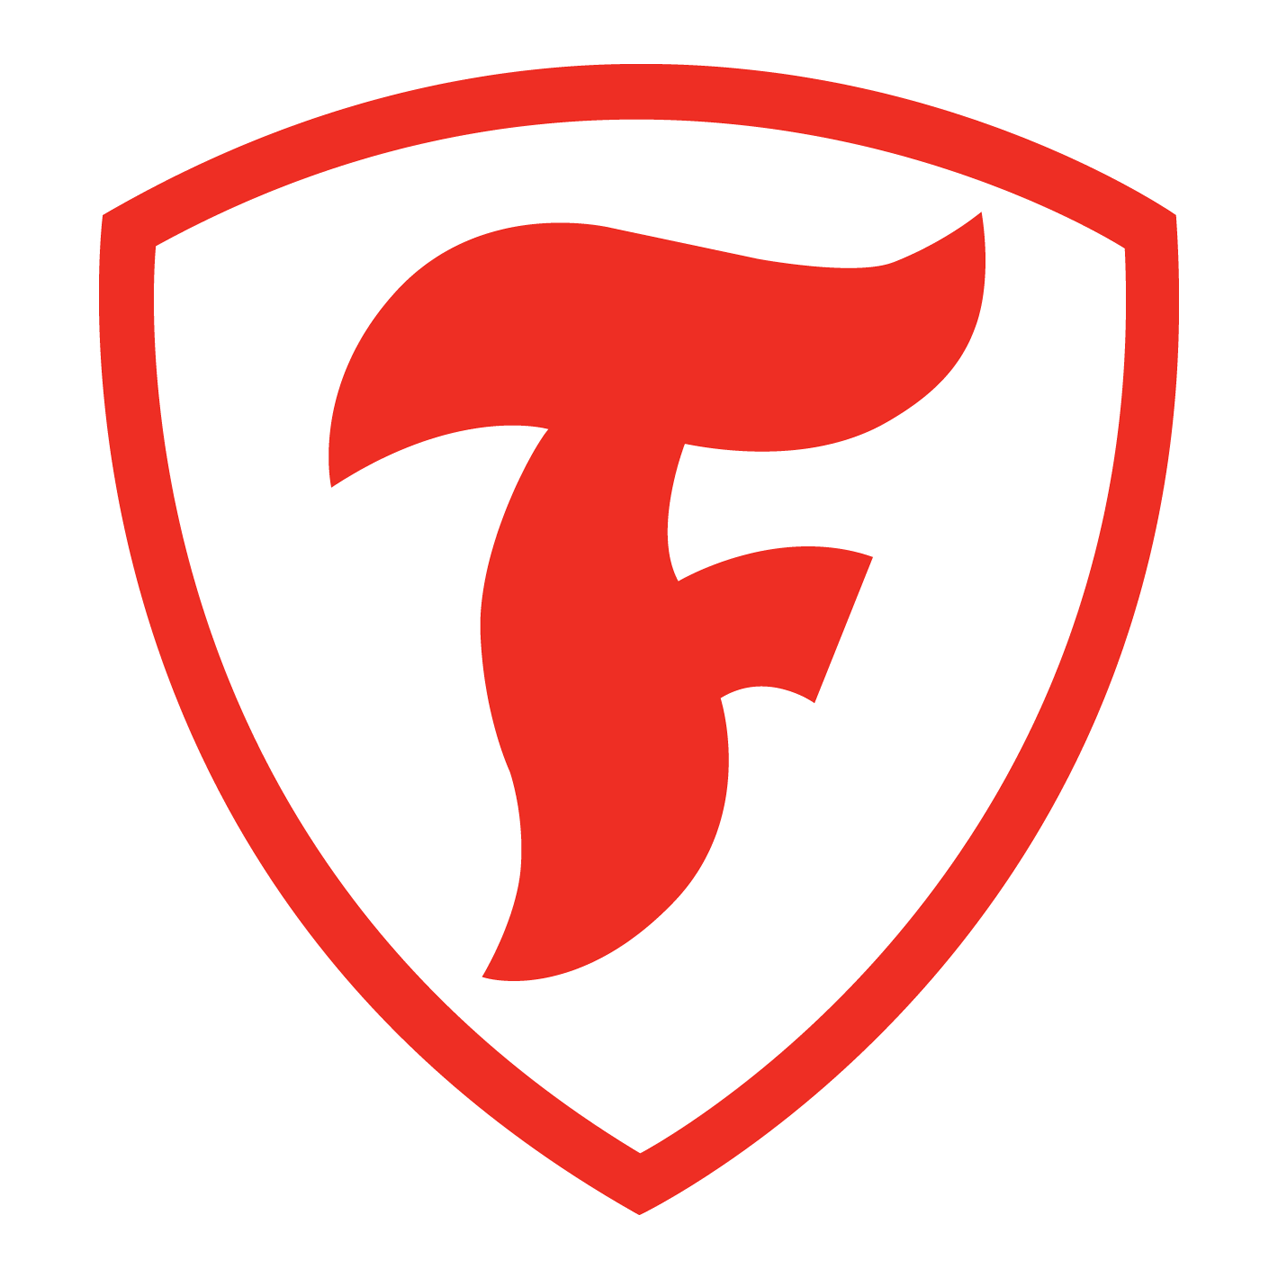 Who Has Red F Logo - Firestone logo - Fonts In Use